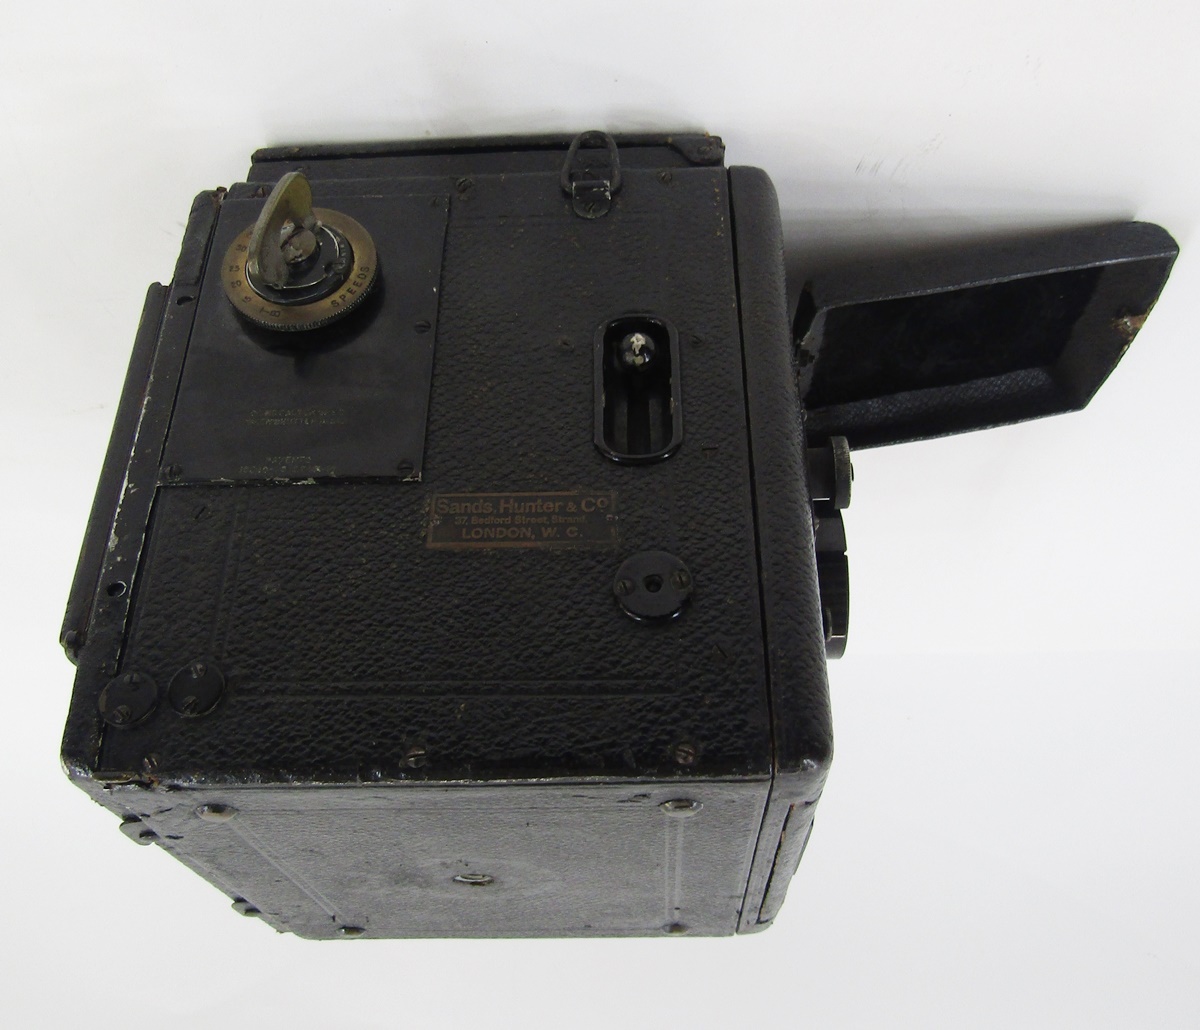 Early 20th century Sands Hunter & co Ensign Popular reflex camera, patent 15548-08, with Carl - Image 8 of 8